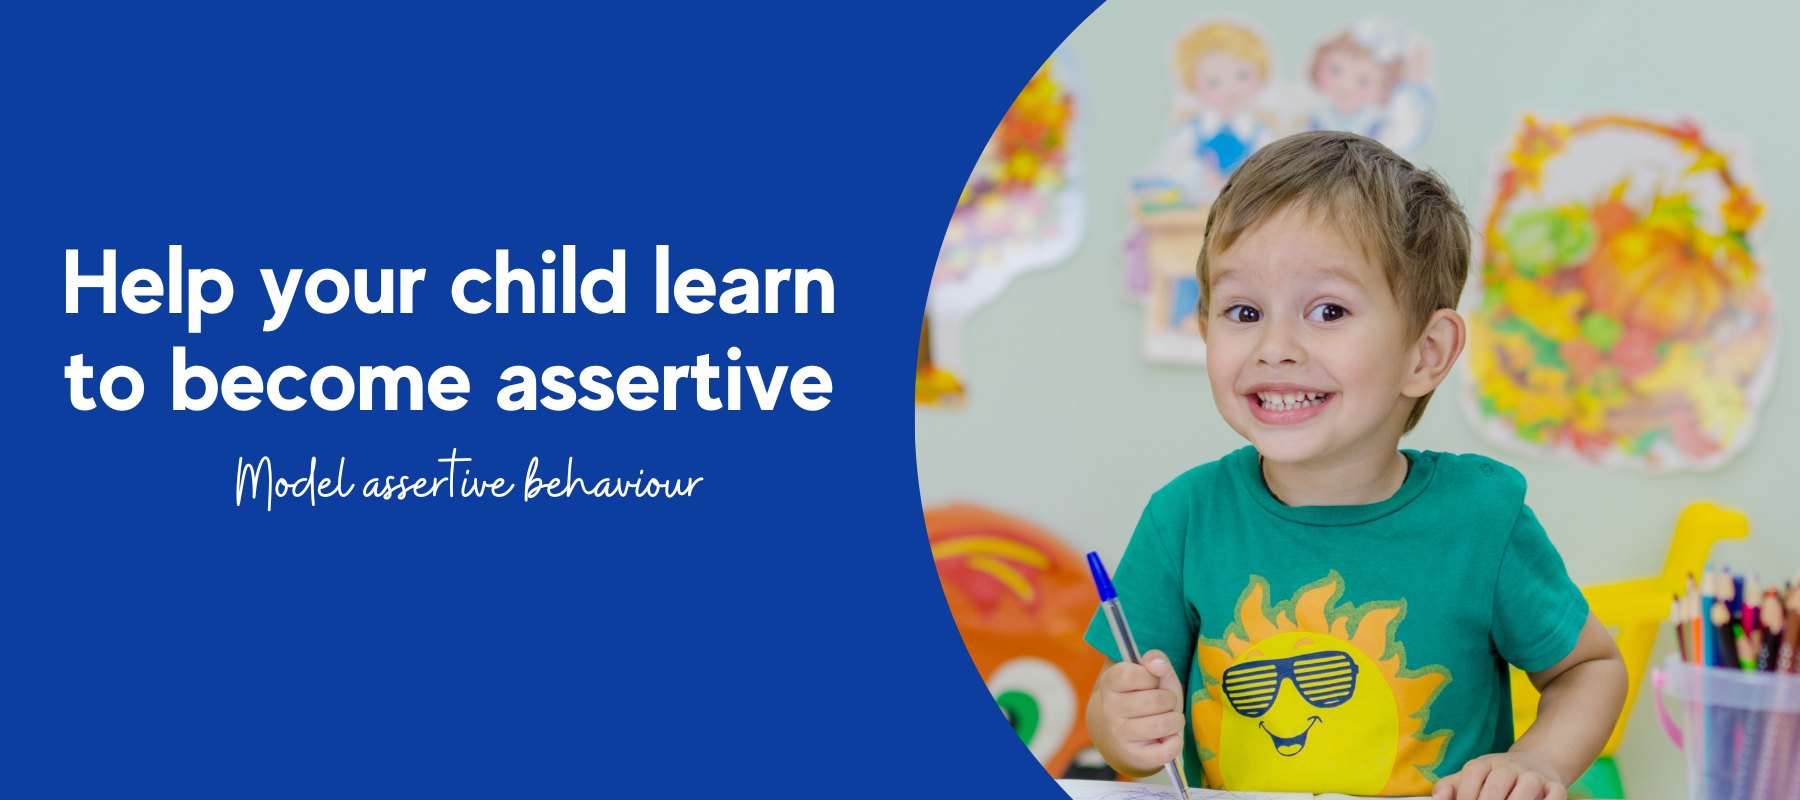 Help your child learn to become assertive